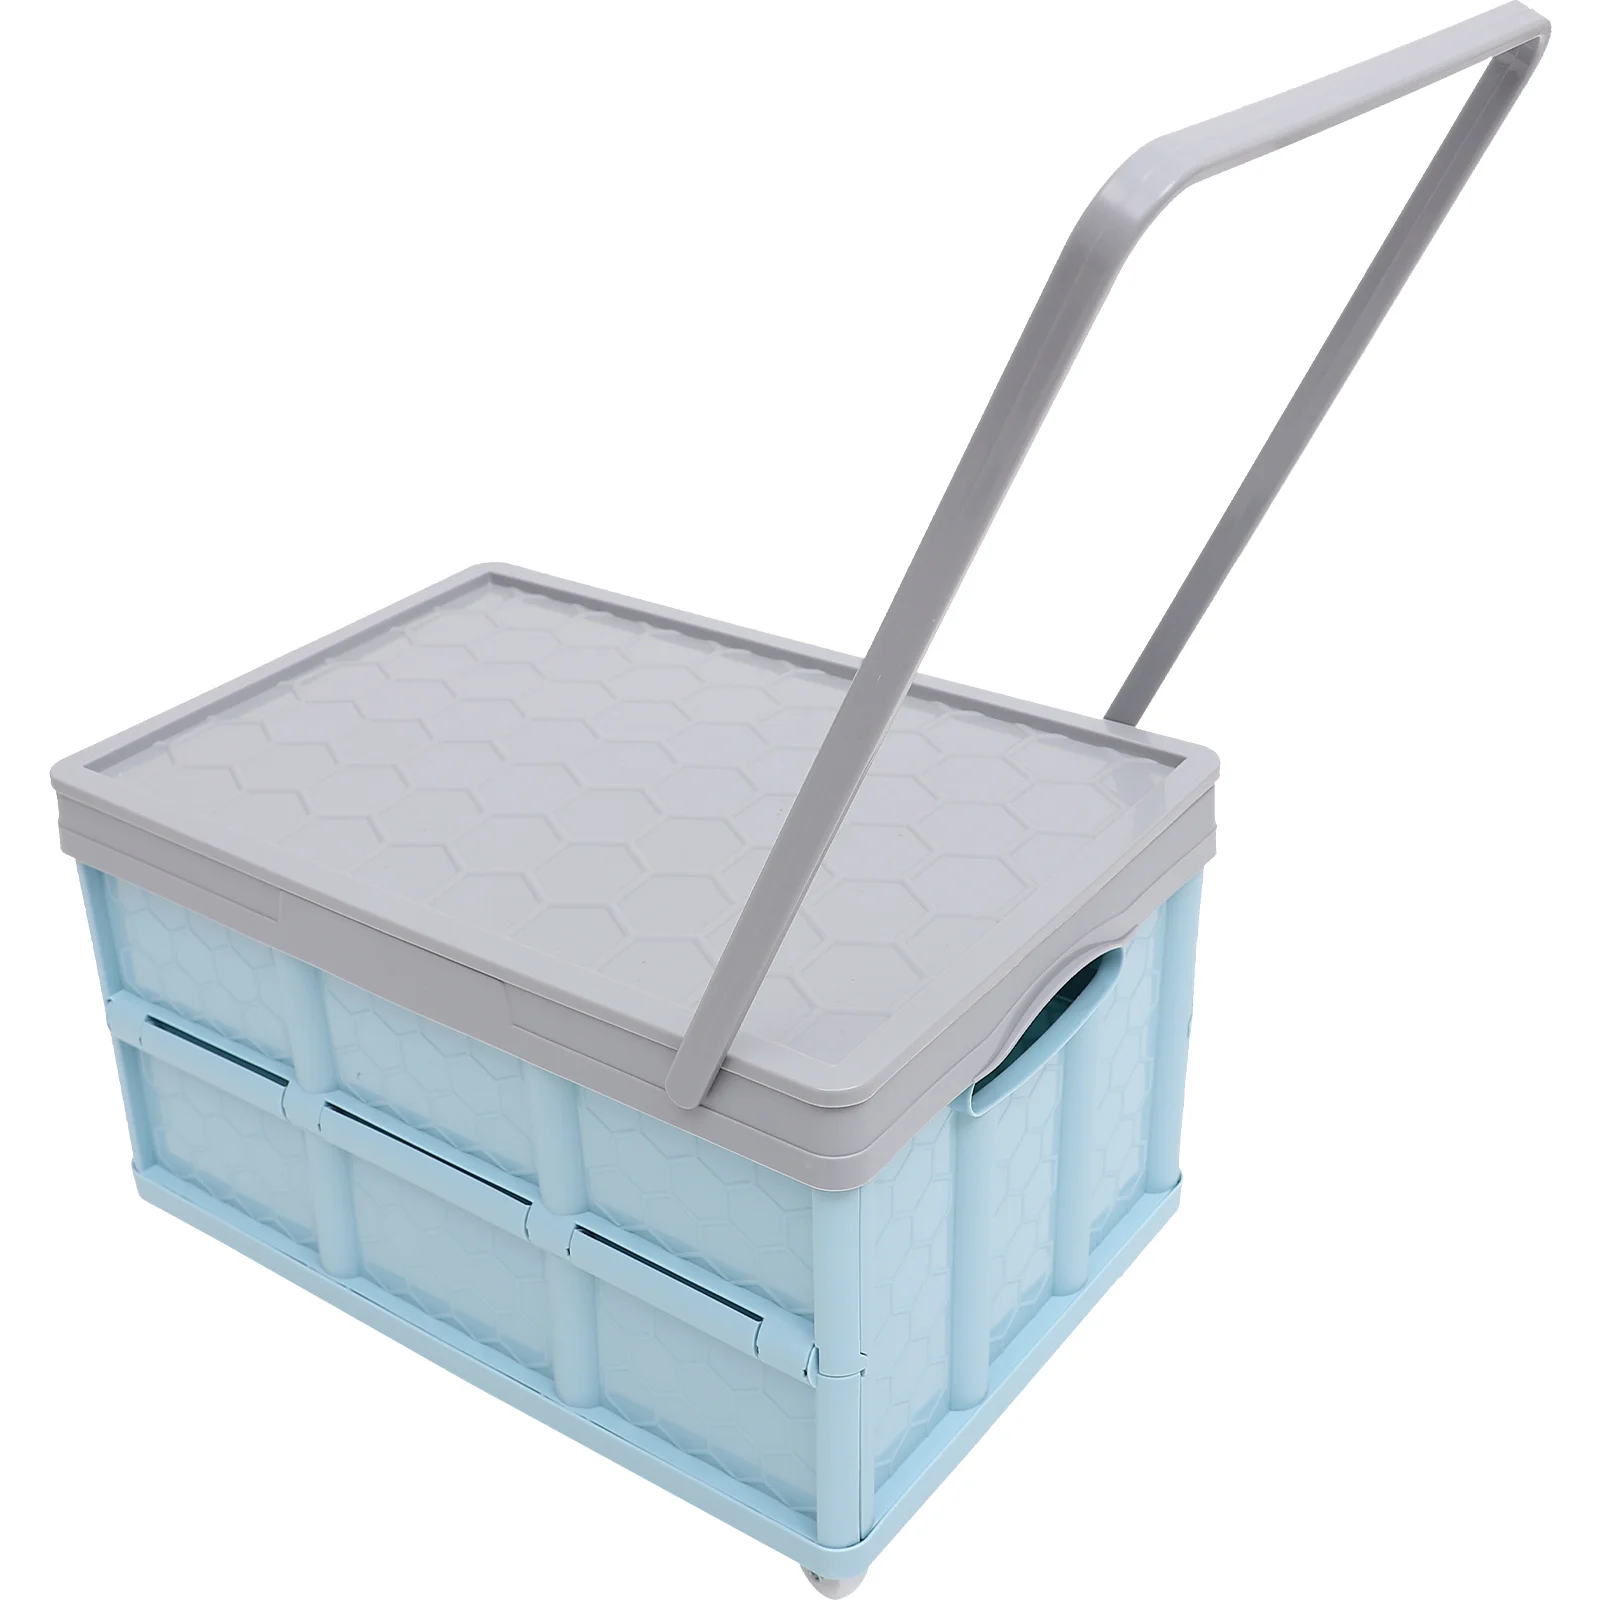 

Storage Containers Lids Garage Collapsible Crate Plastic Bins Book Box Crates Stackable Shopping Clothing